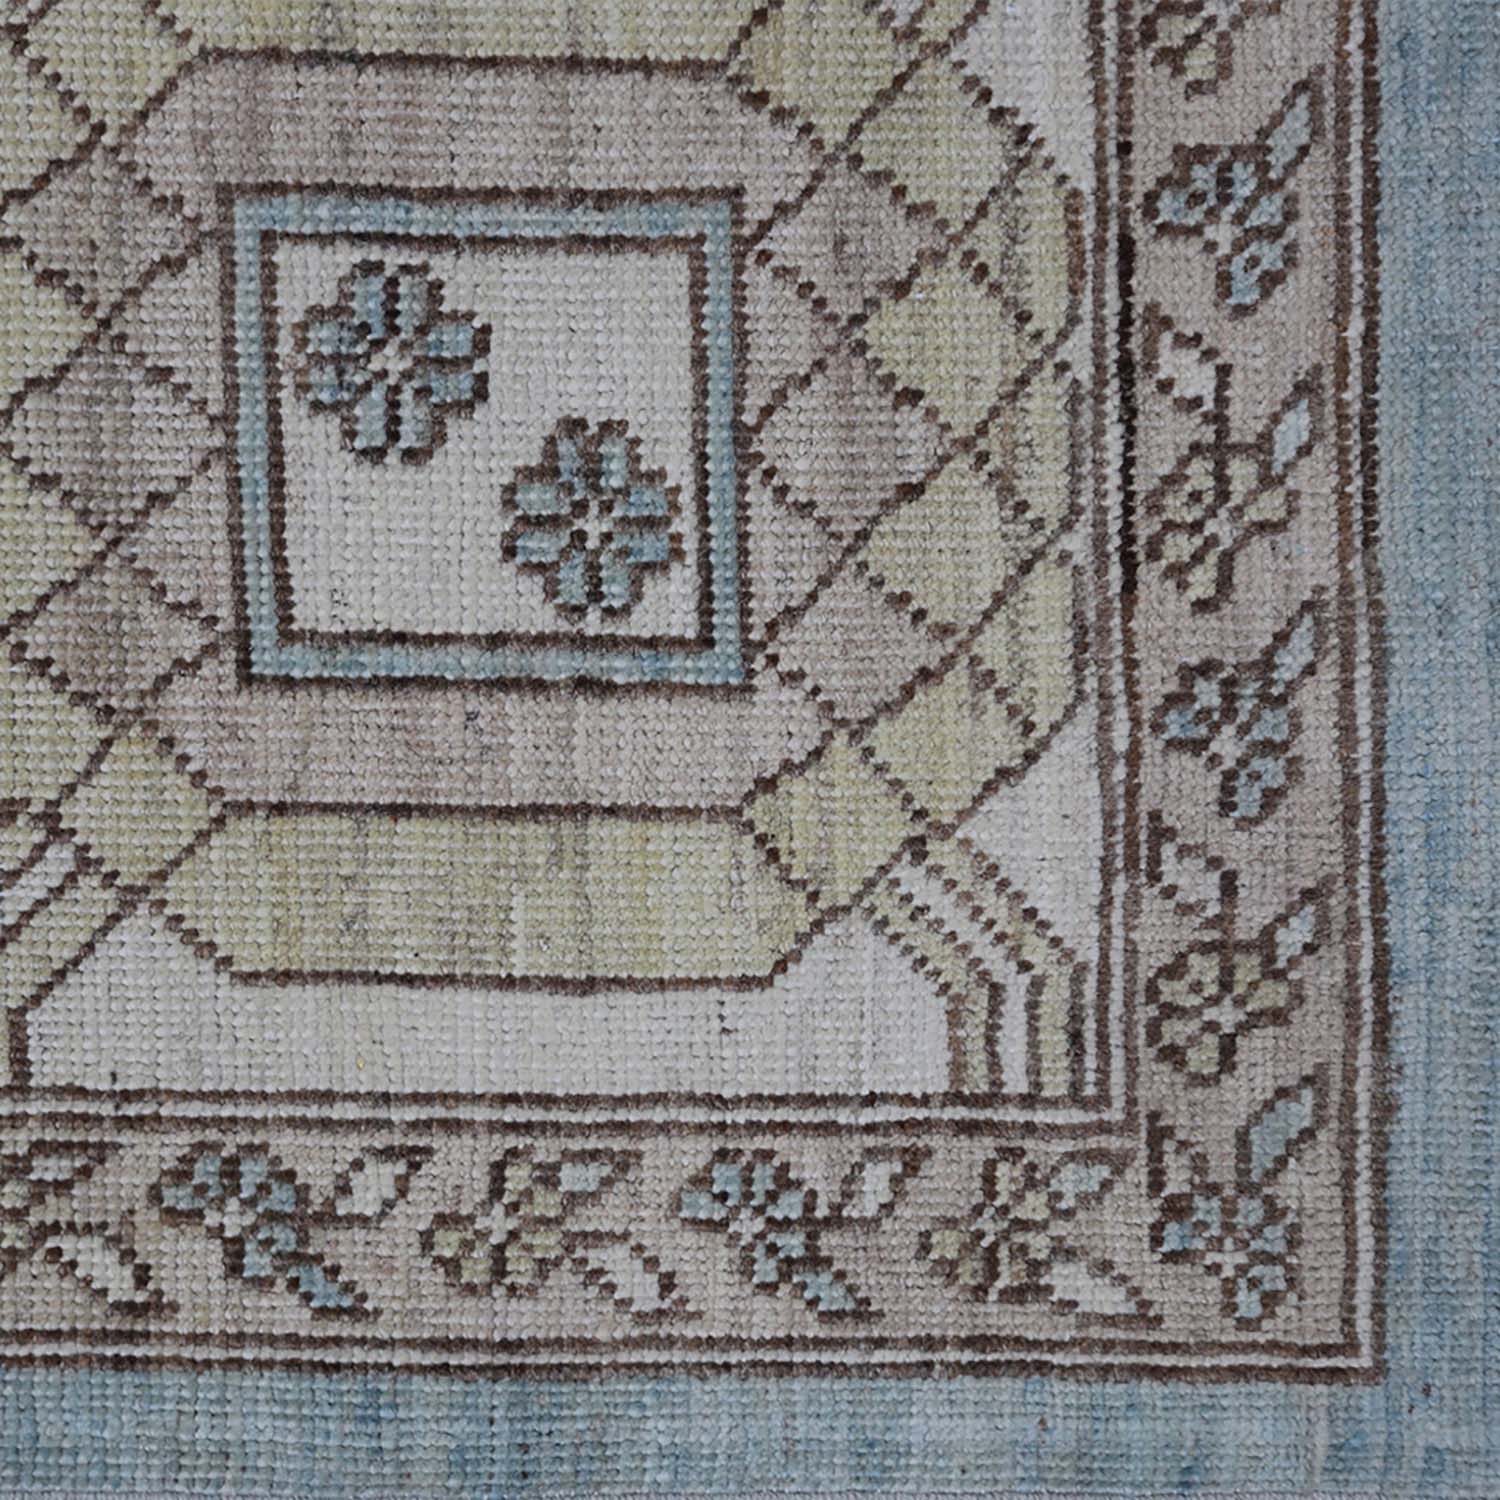 Intricate carpet with geometric shapes, floral motifs; earth-toned color palette.